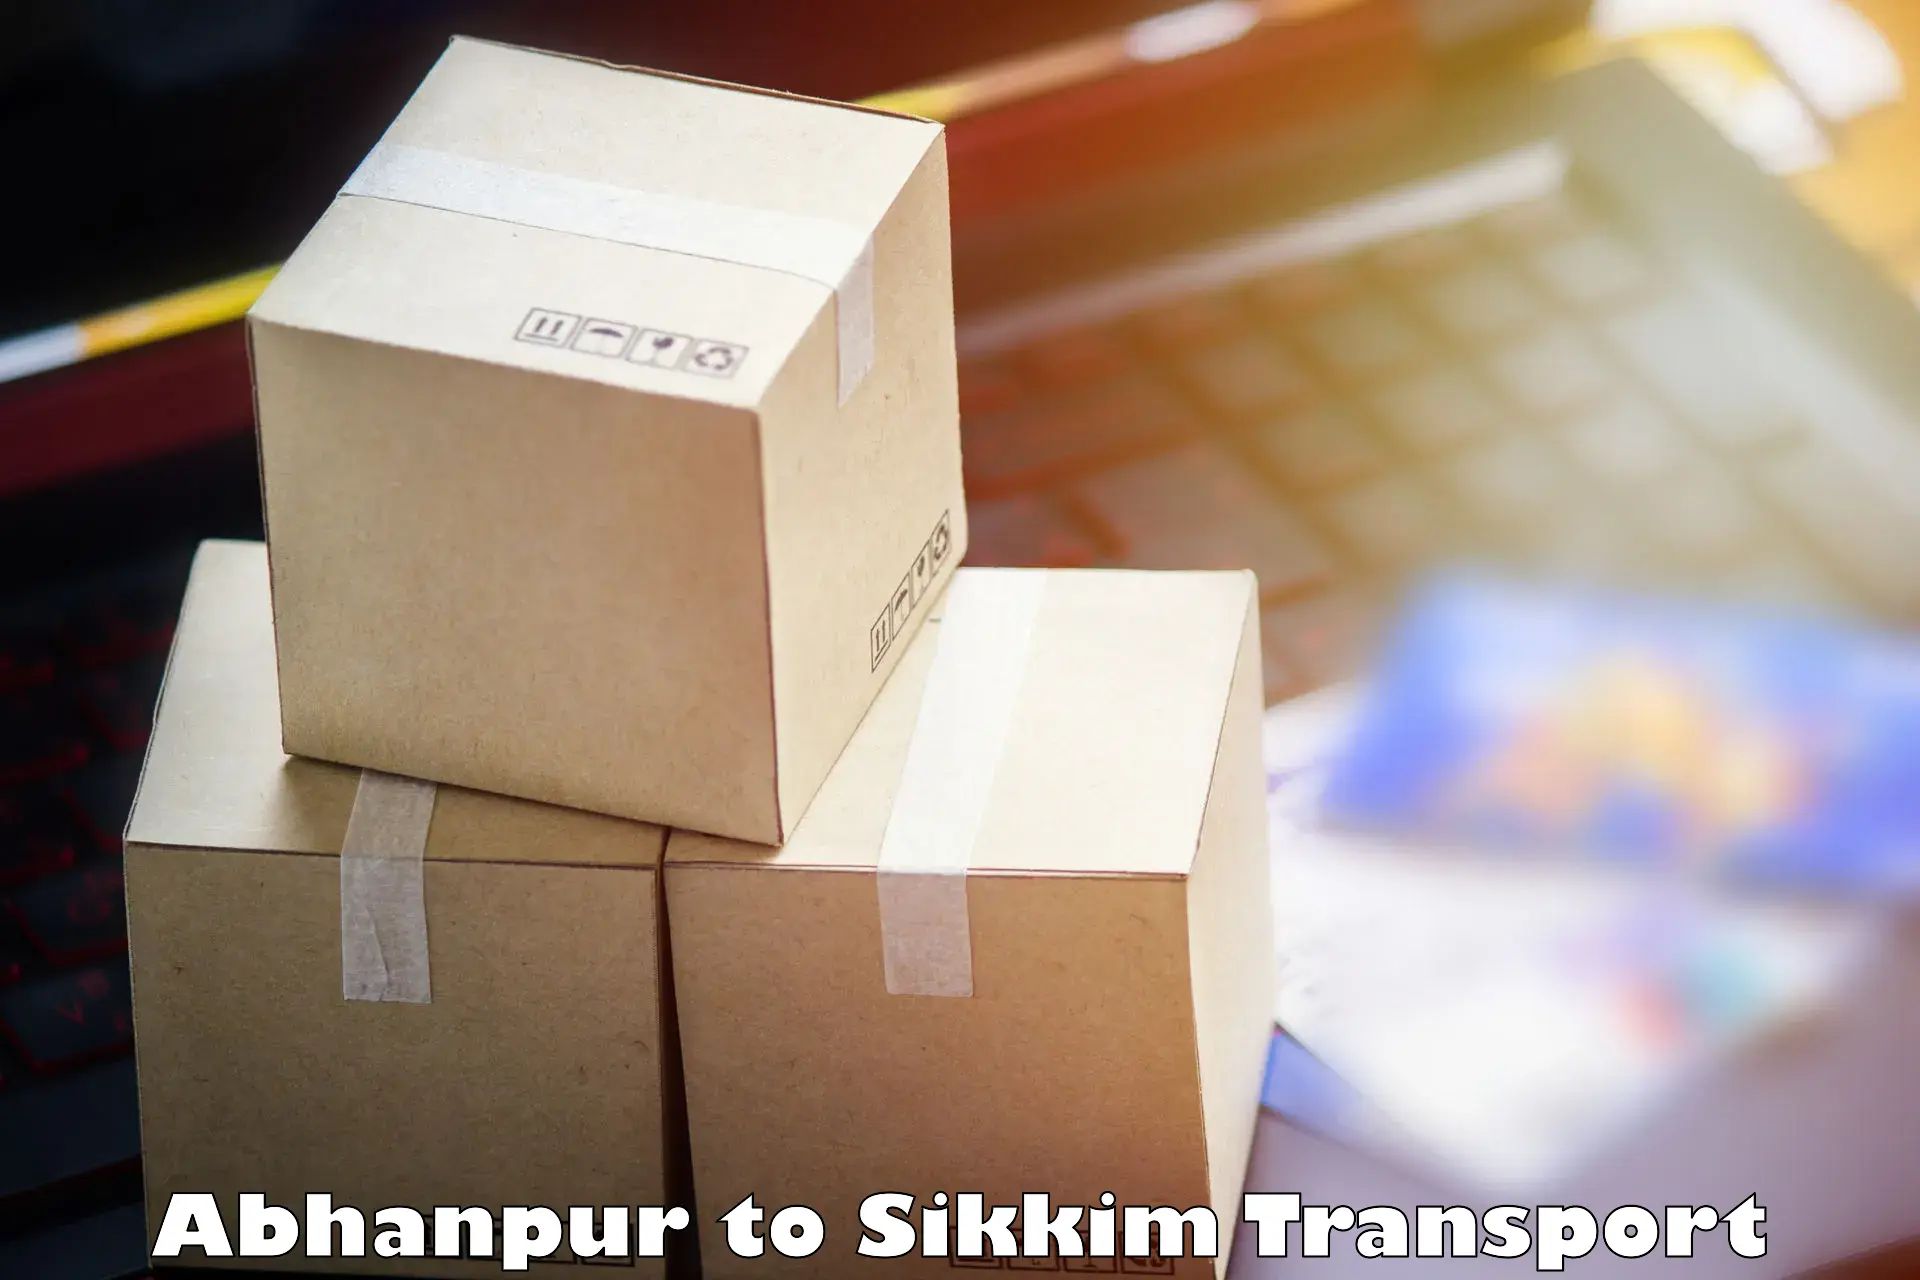 Delivery service Abhanpur to South Sikkim